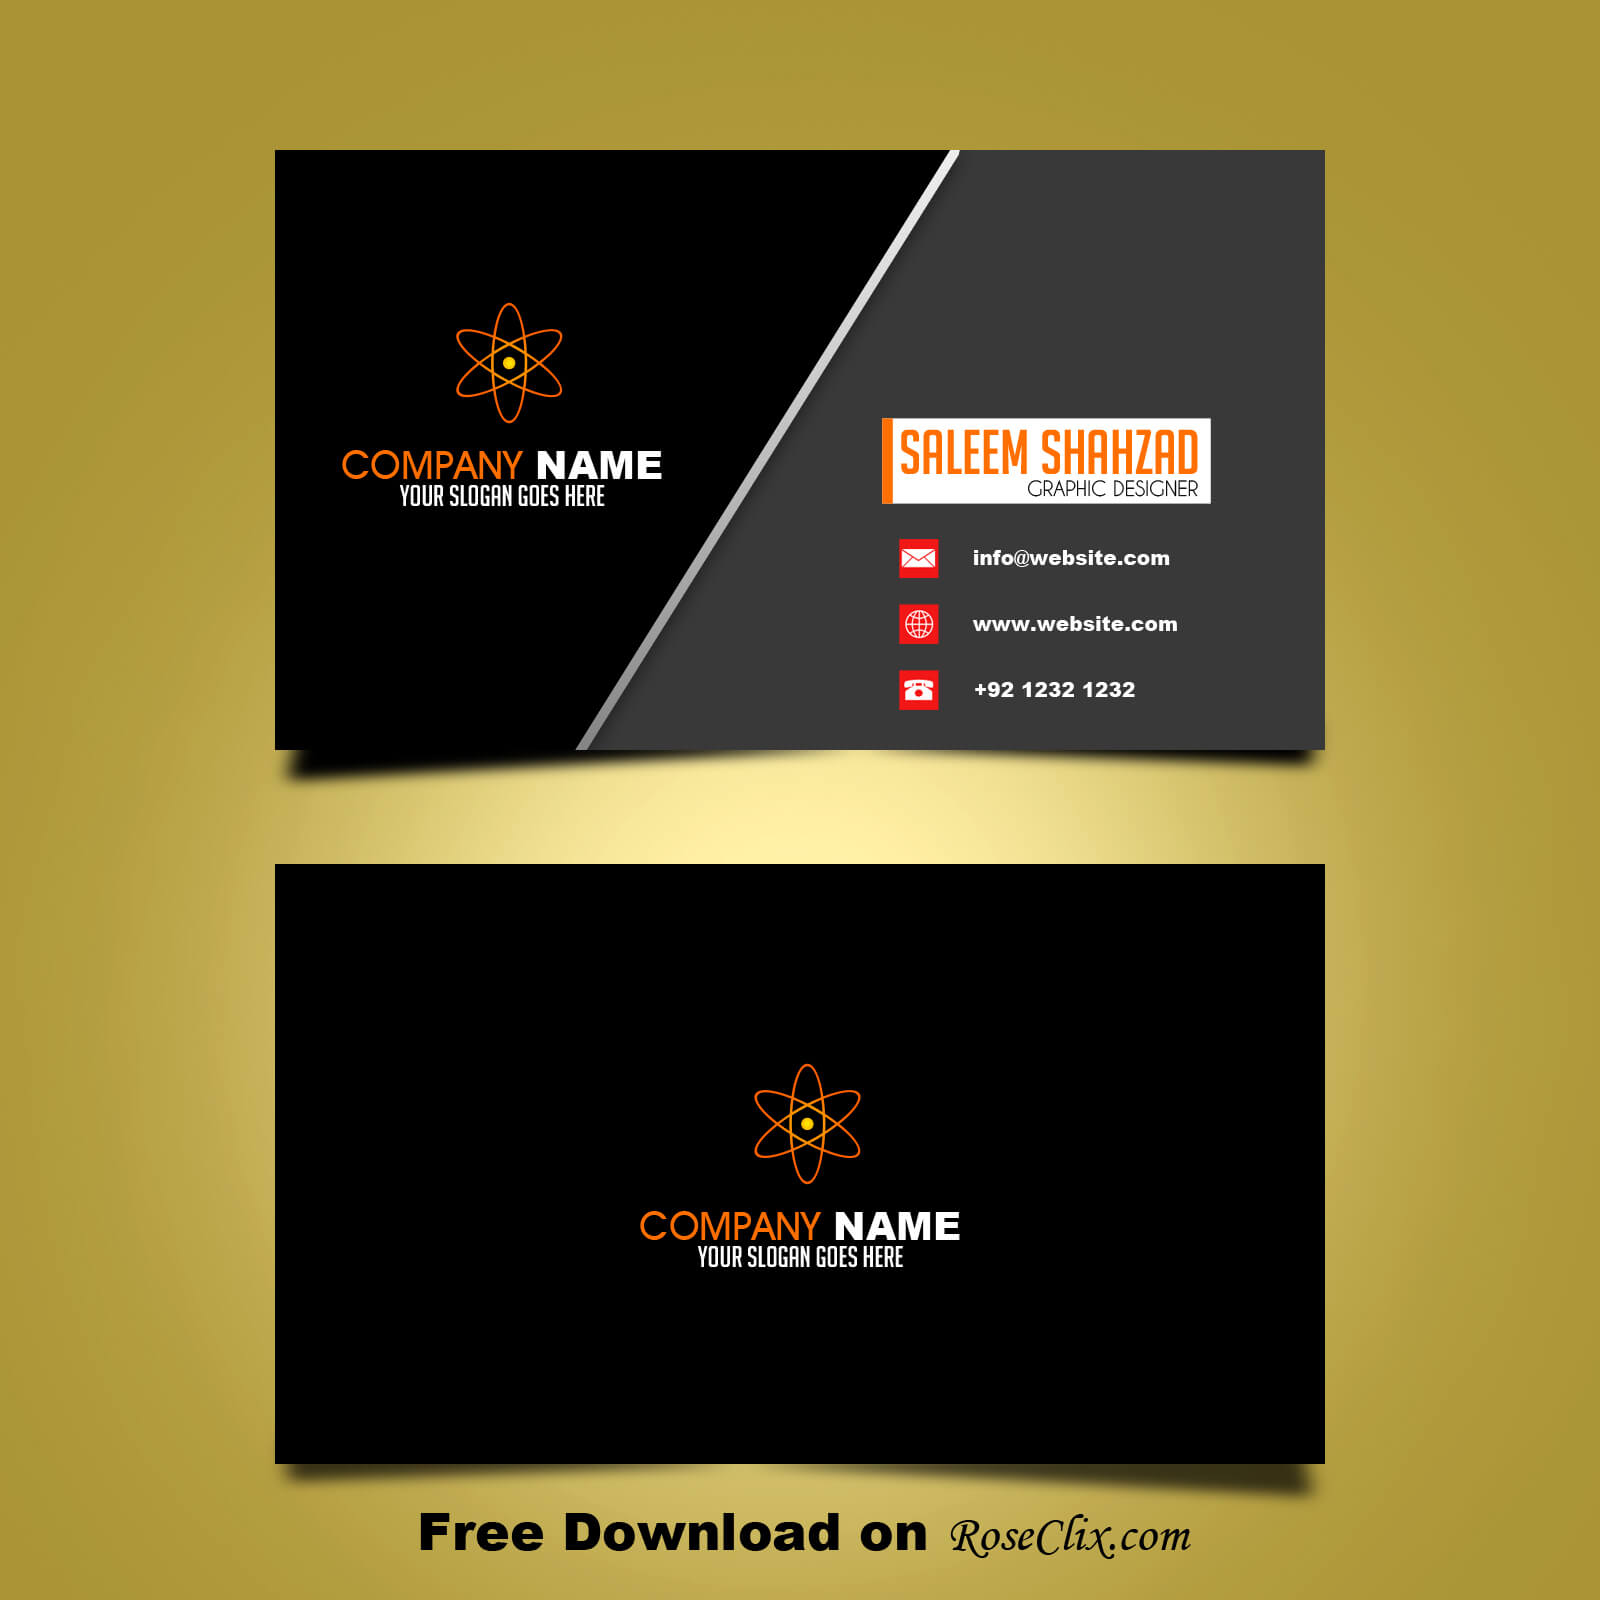 003 Free Downloads Business Cards Templates Template Ideas With Templates For Visiting Cards Free Downloads